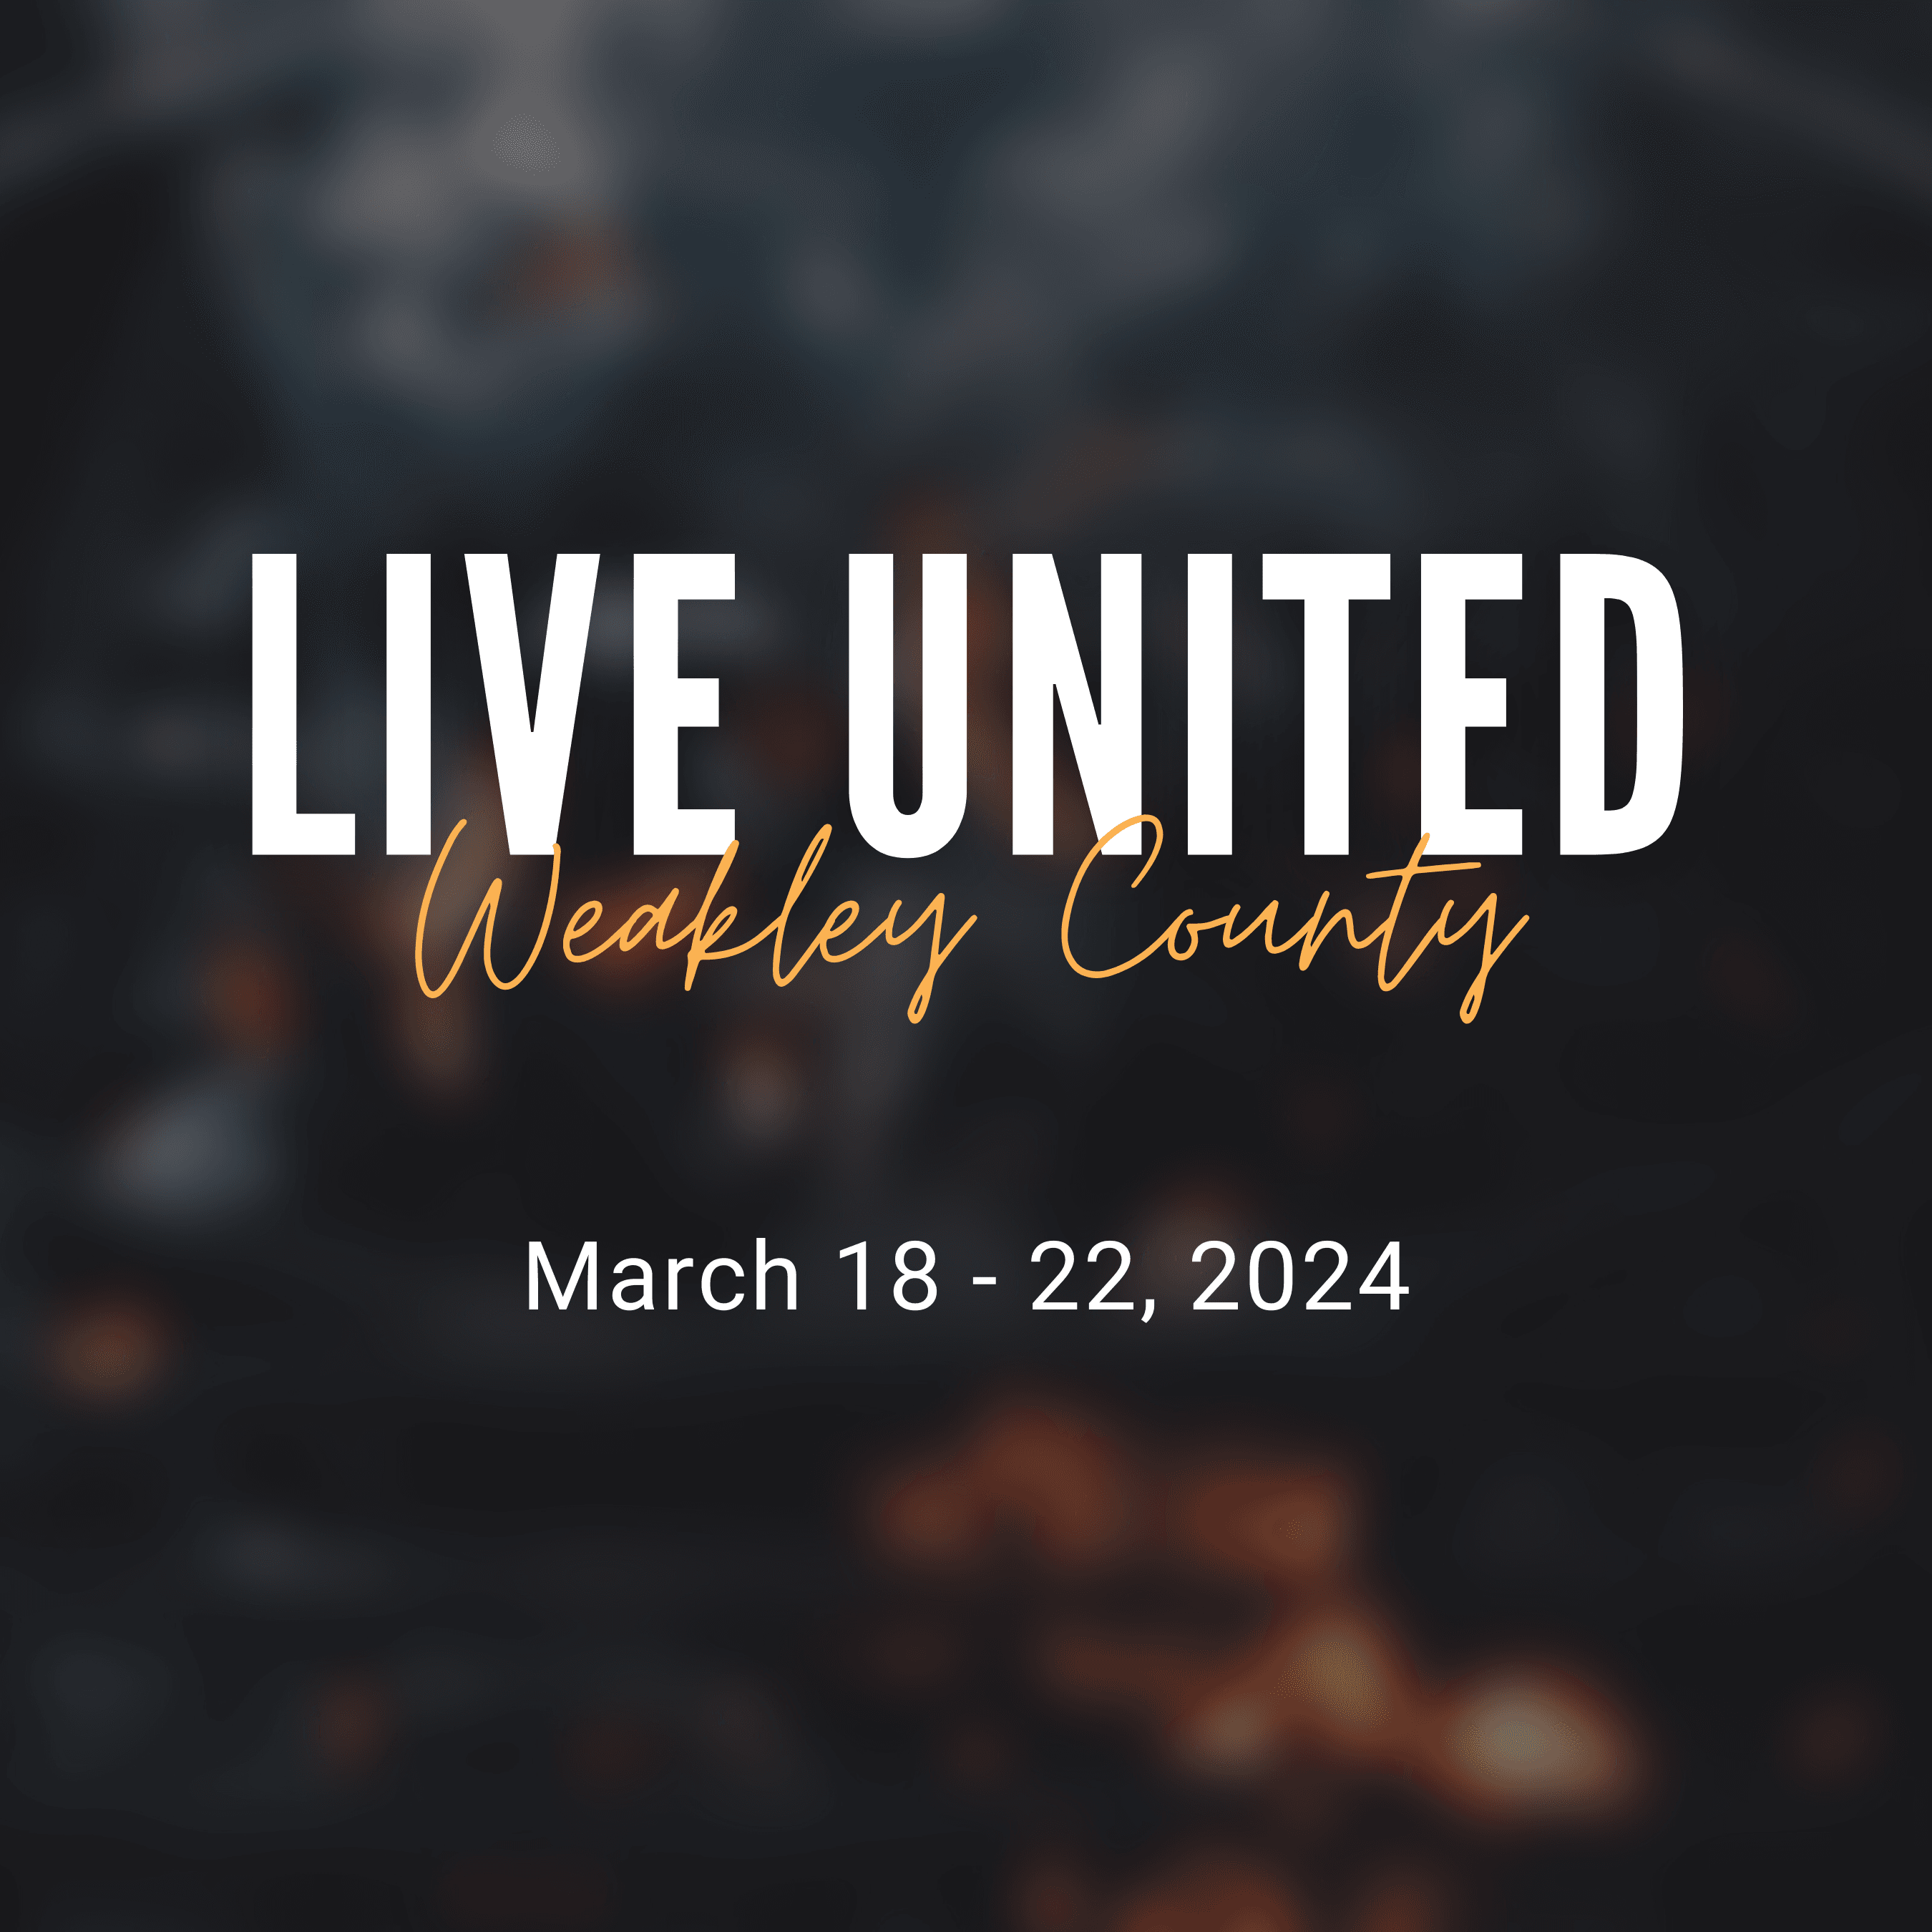 United Way Partners with Weakley County to Celebrate LIVE UNITED 2024